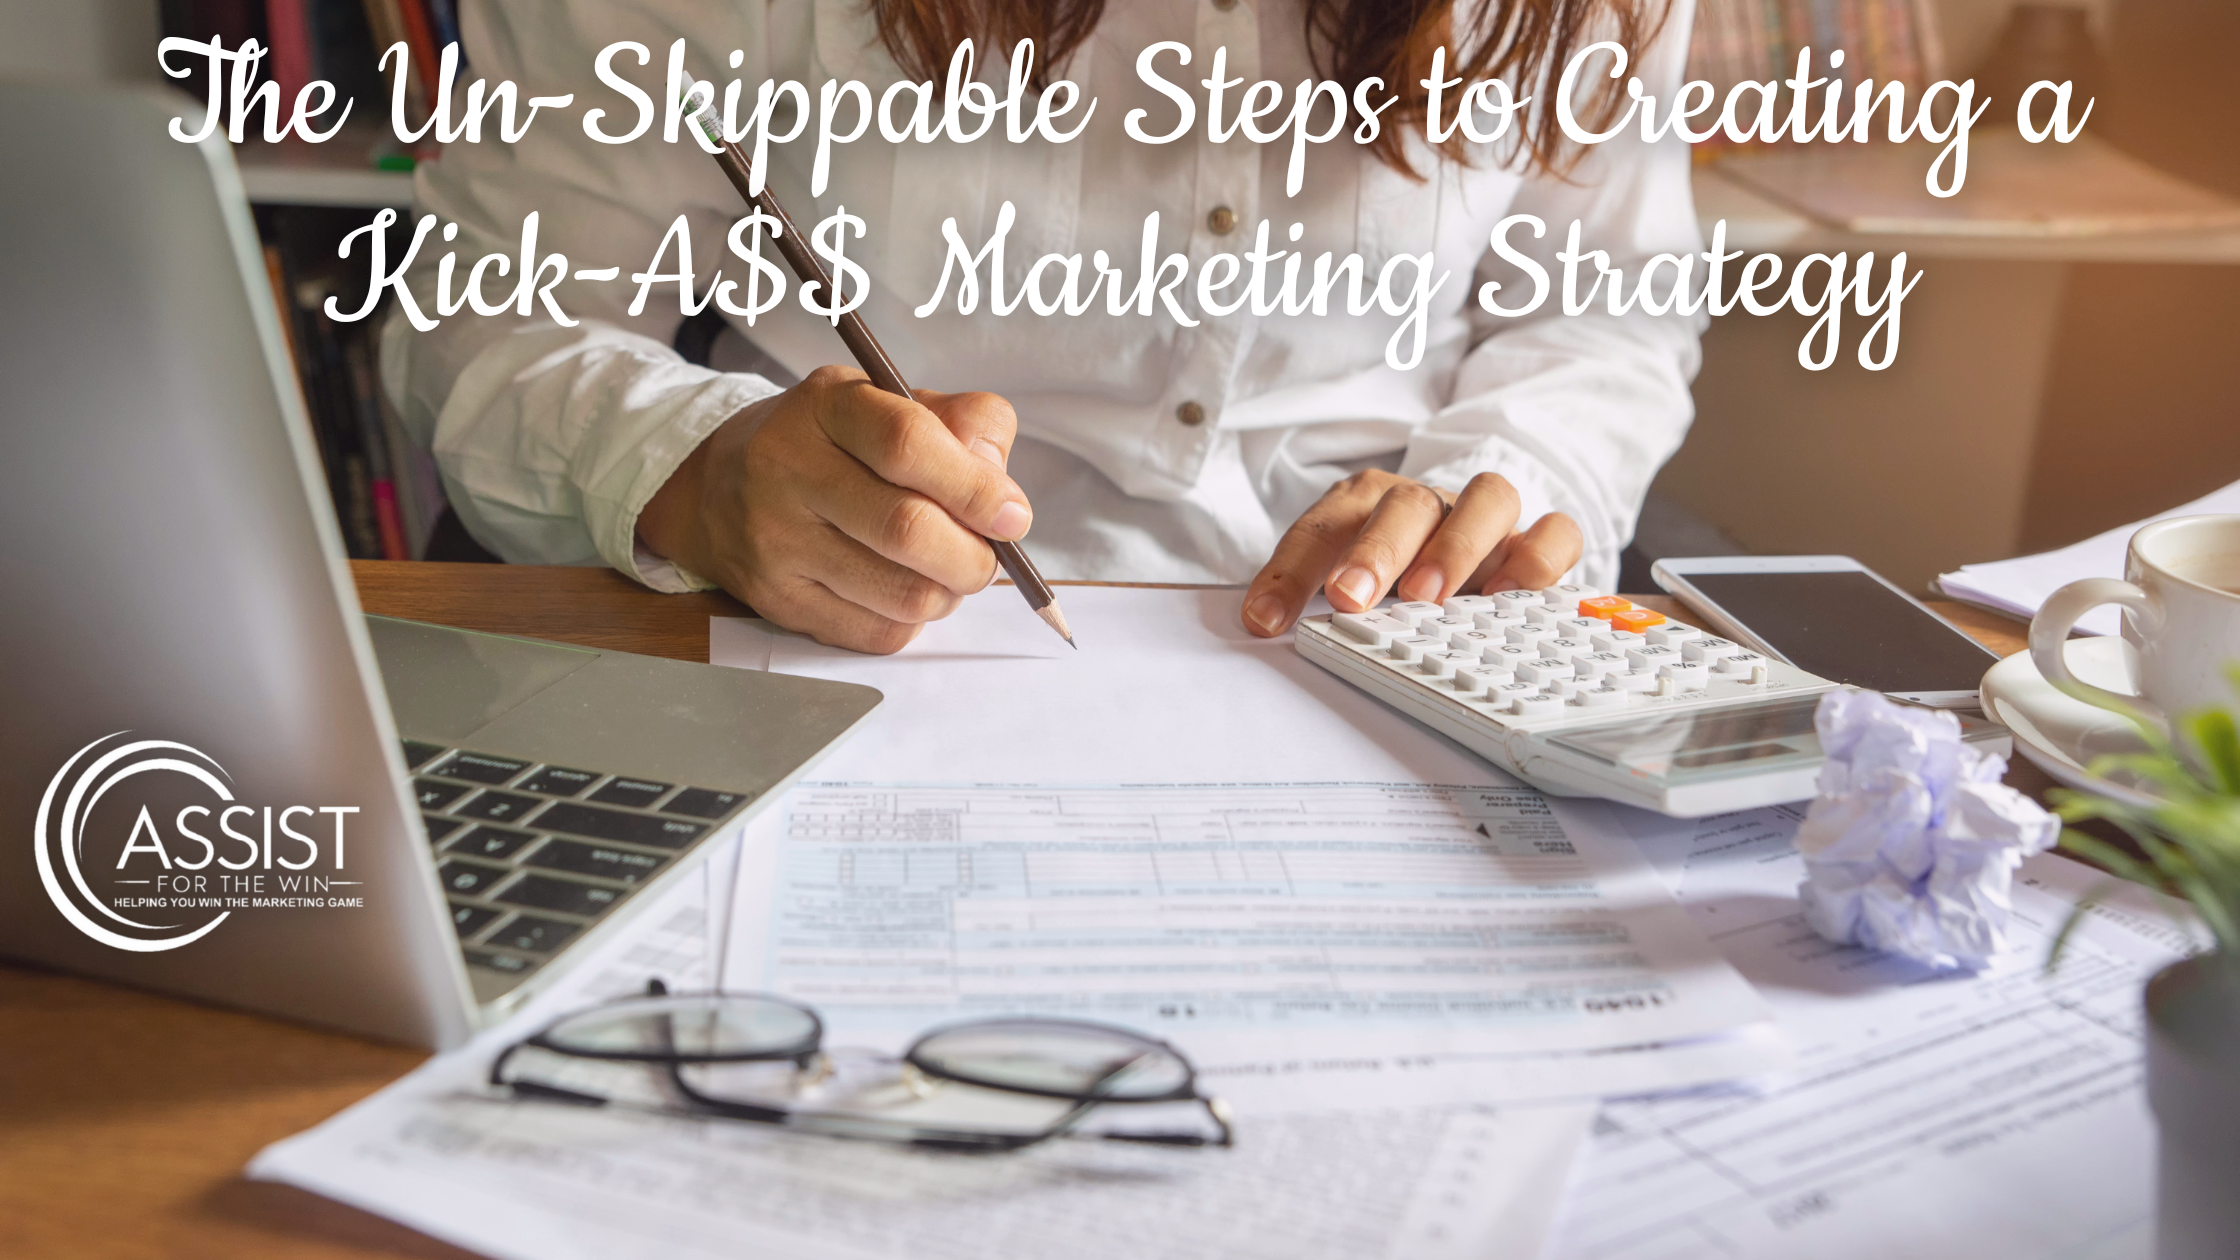 The Un-Skippable Steps to Creating a Kick-A$$ Marketing Strategy